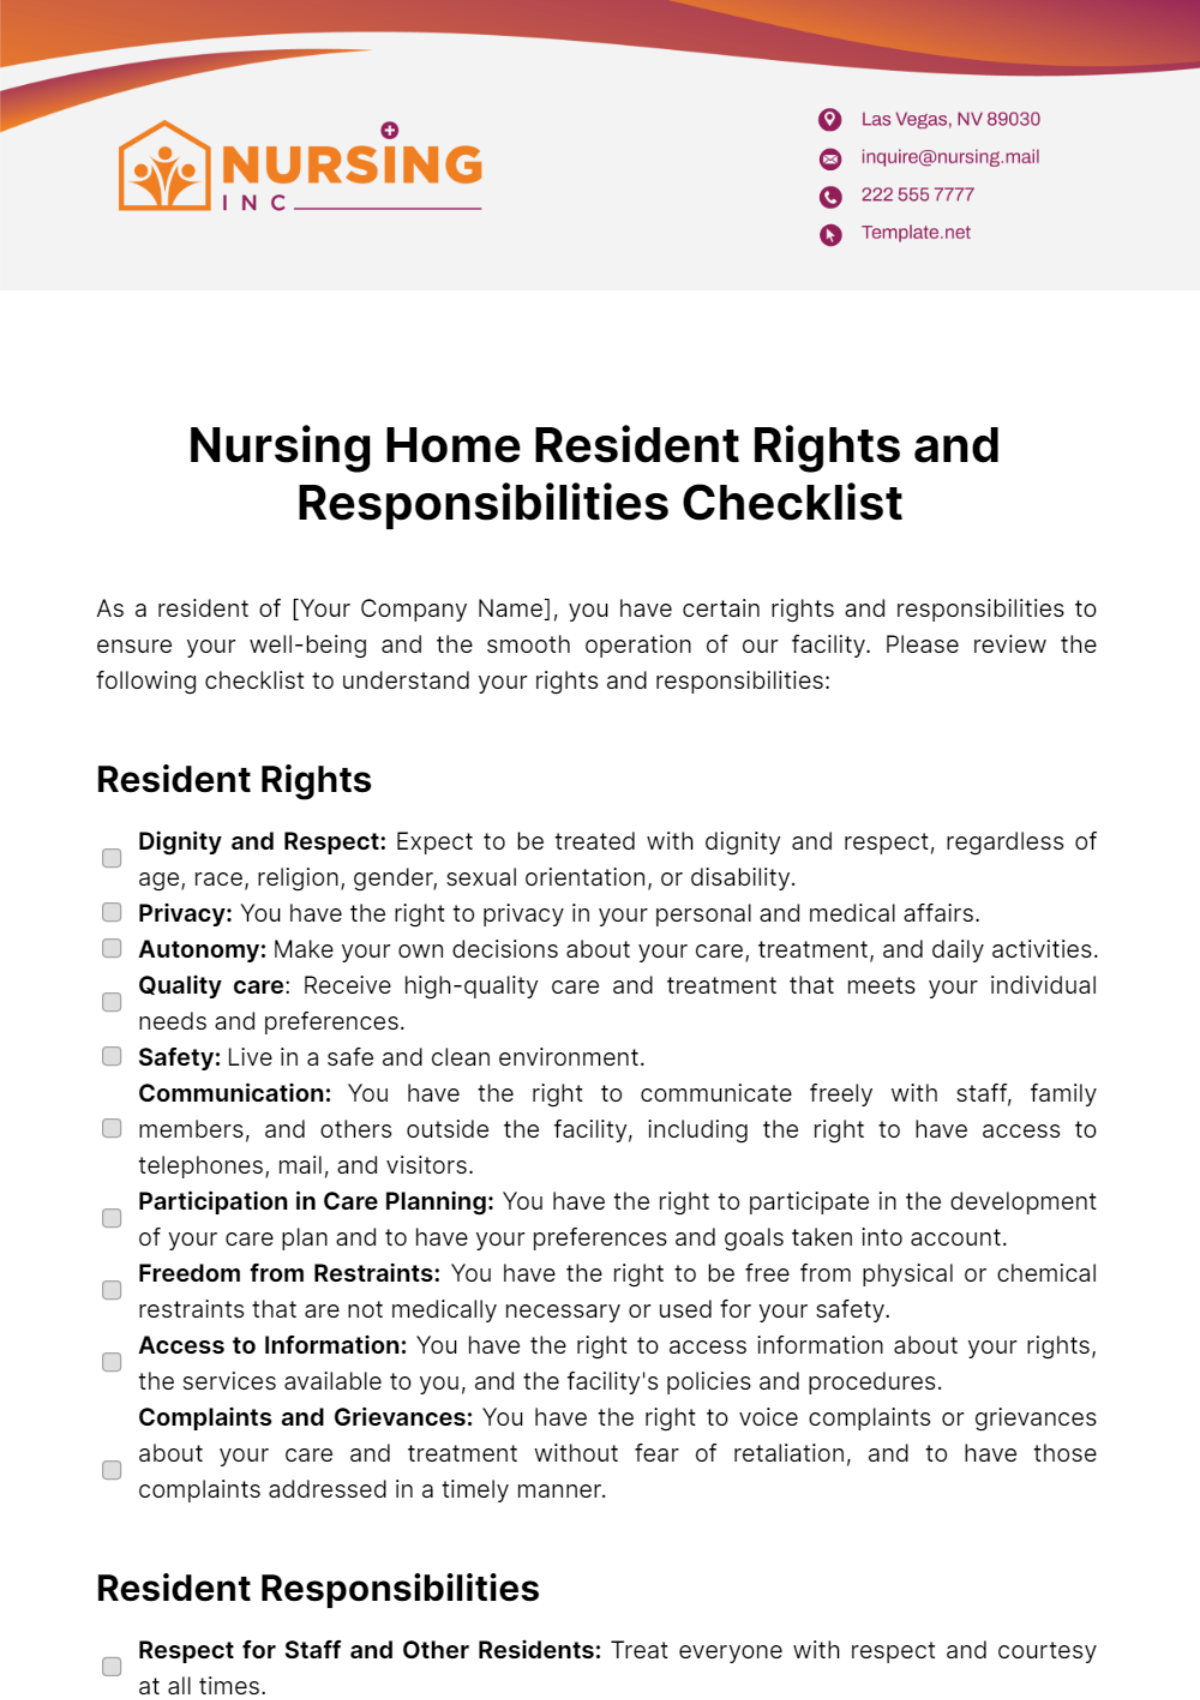 Nursing Home Resident Rights and Responsibilities Checklist Template